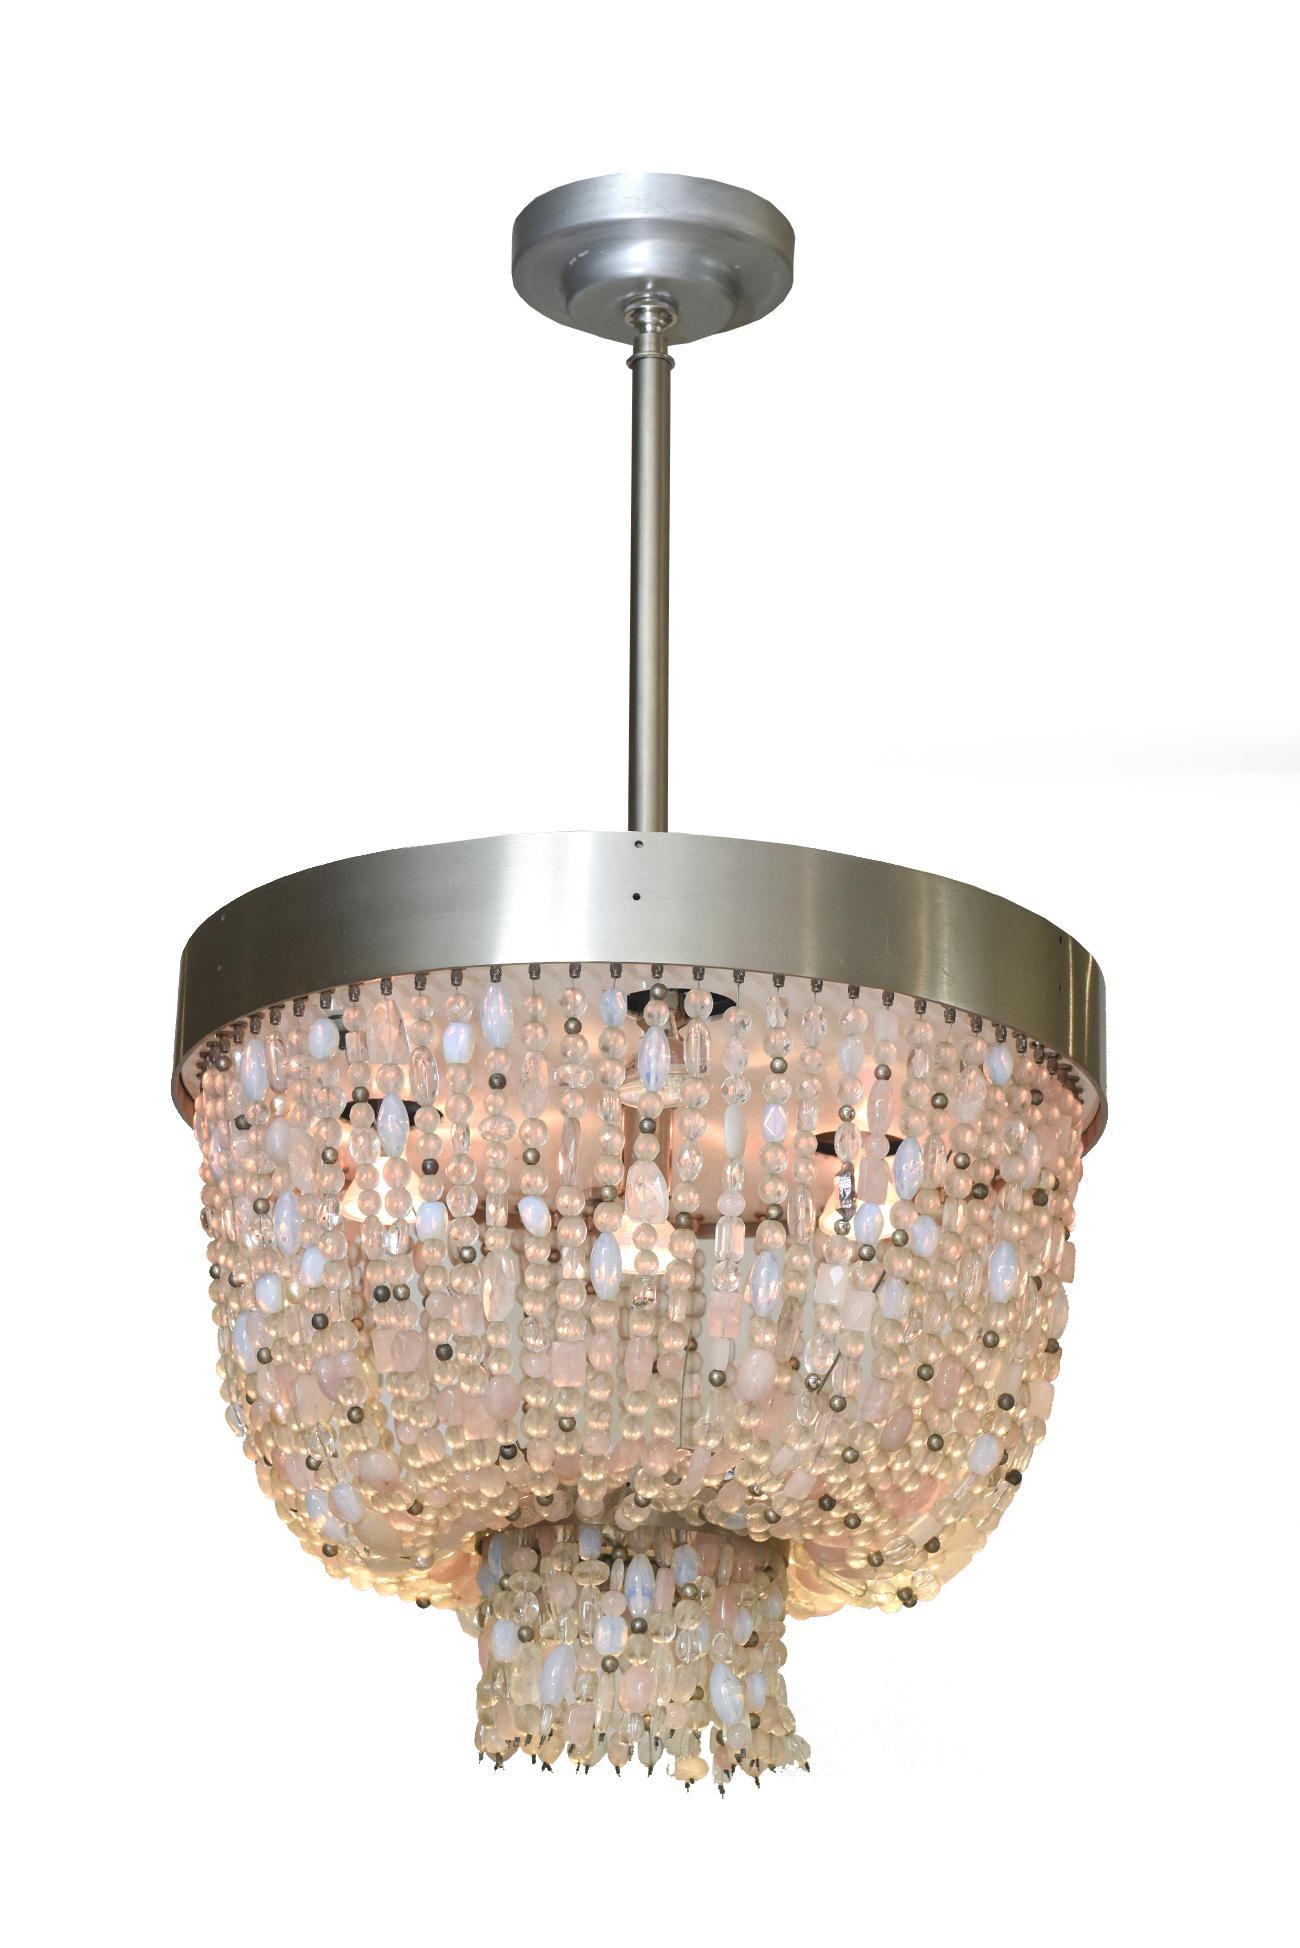  Quartz and Stainless Steel Two Tier Pink Lavaliere Chandelier by Thomas Fuchs For Sale 7